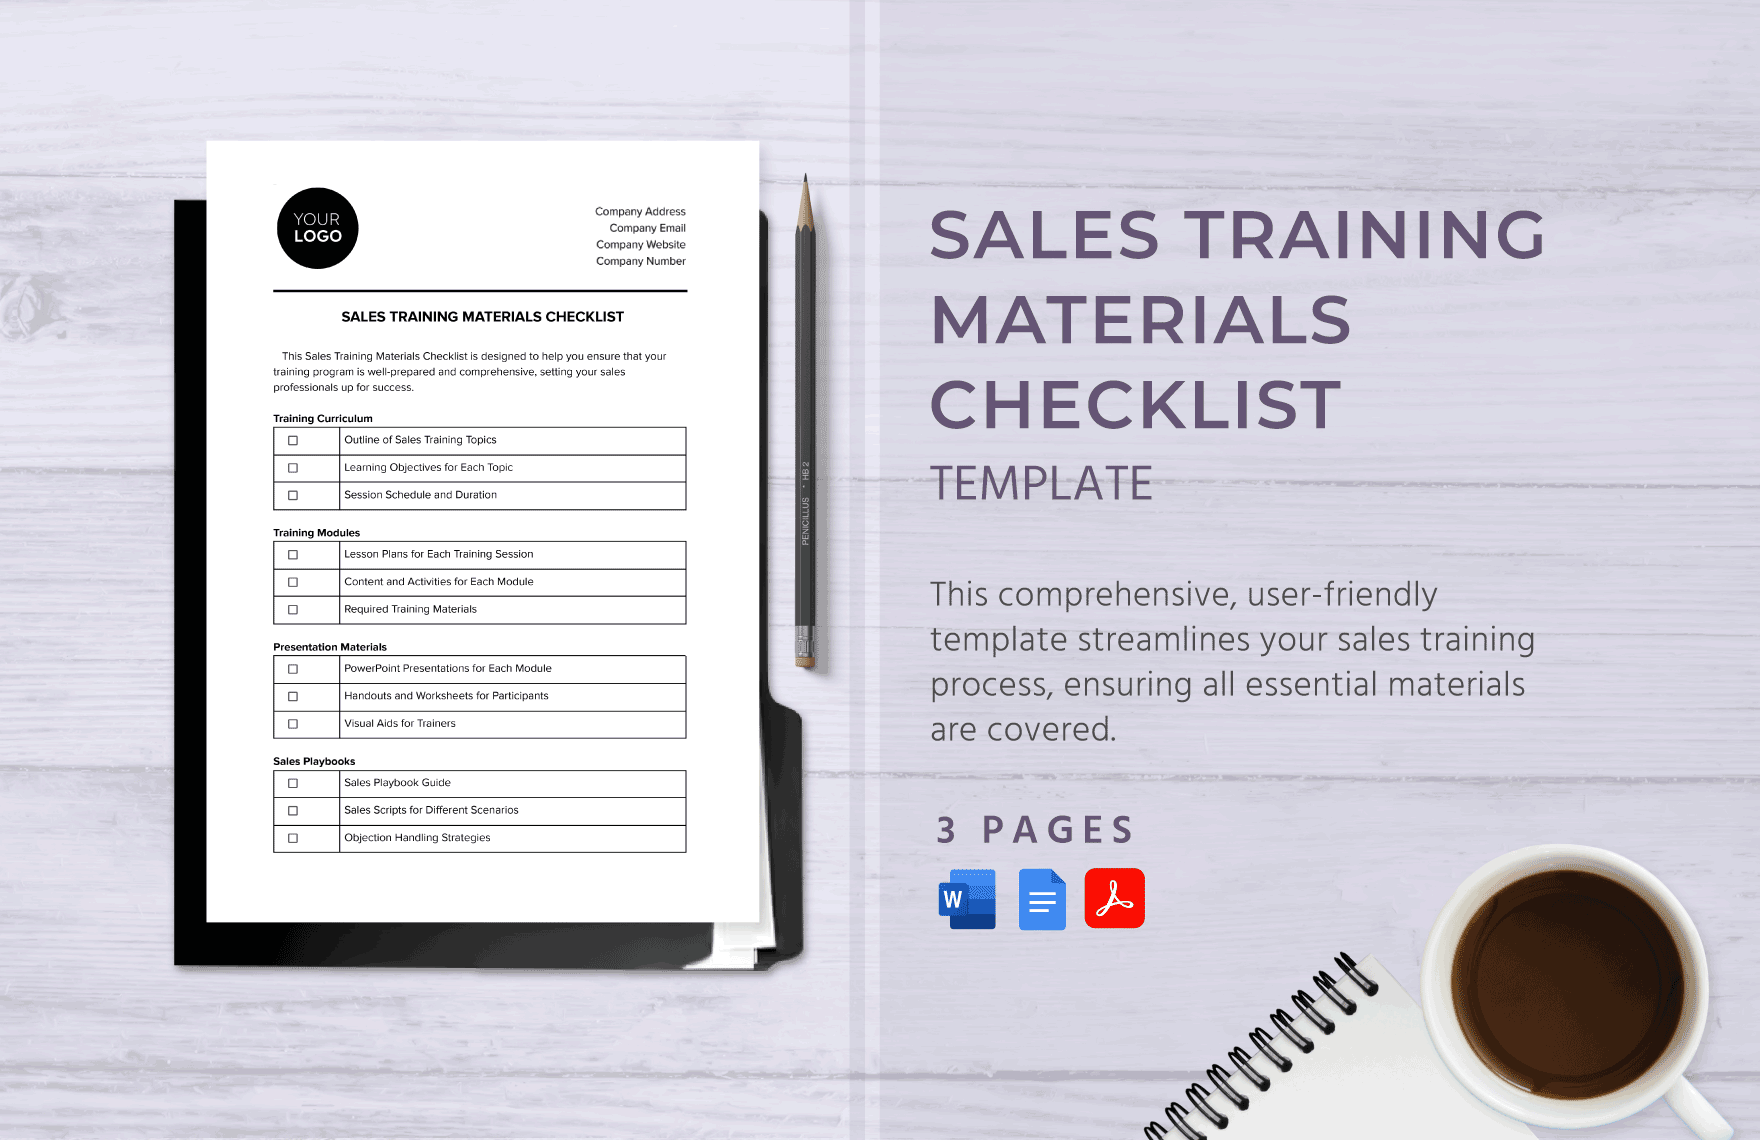 Sales Training Materials Checklist Template in Word, Google Docs, PDF